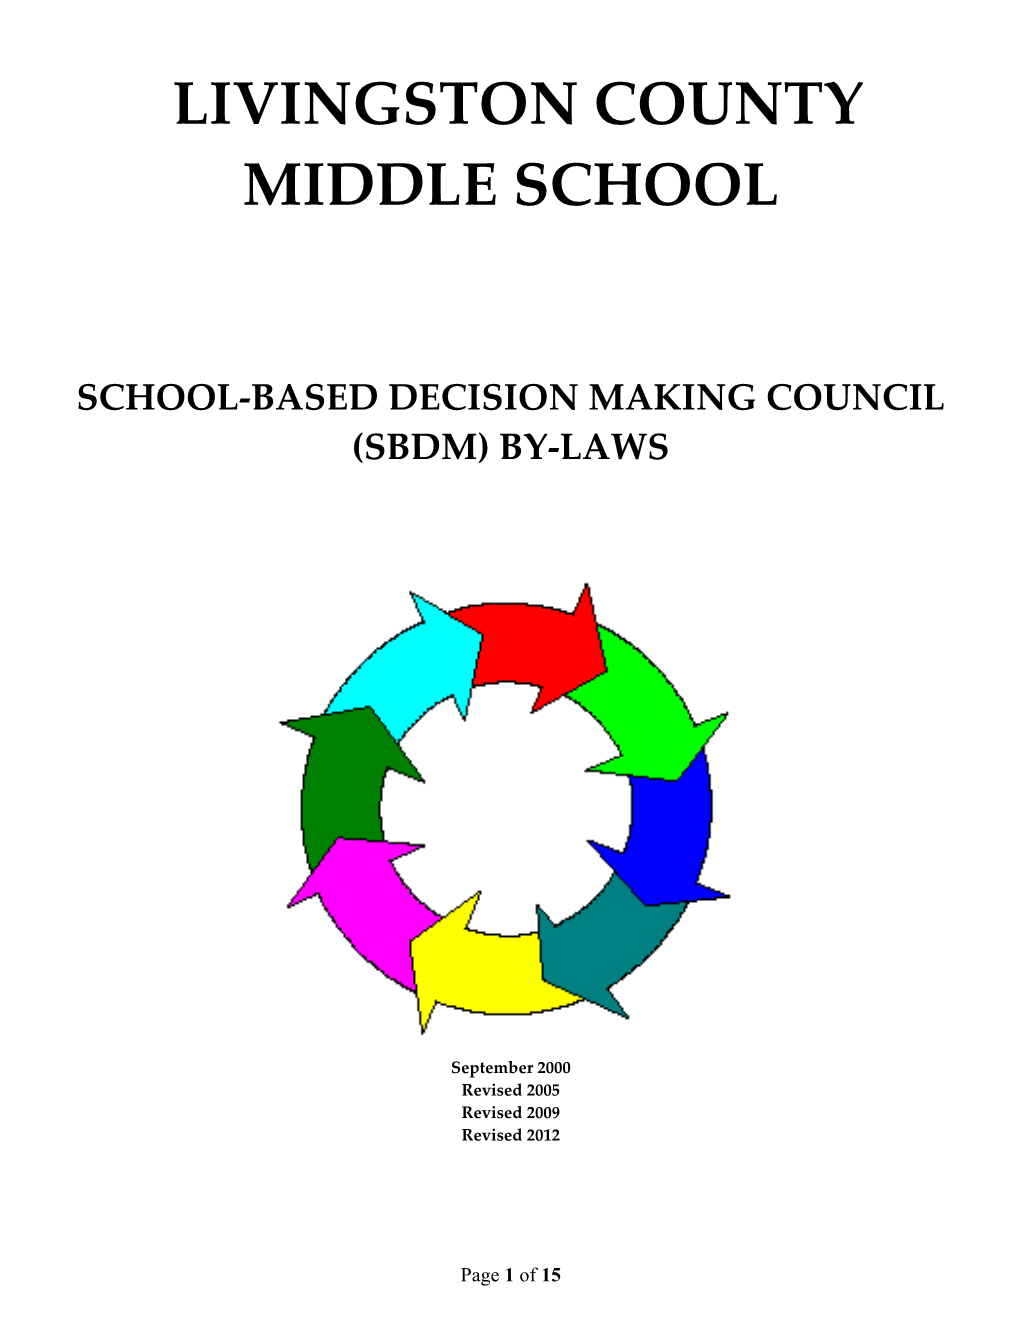 School-Based Decision Makingcouncil (Sbdm) By-Laws